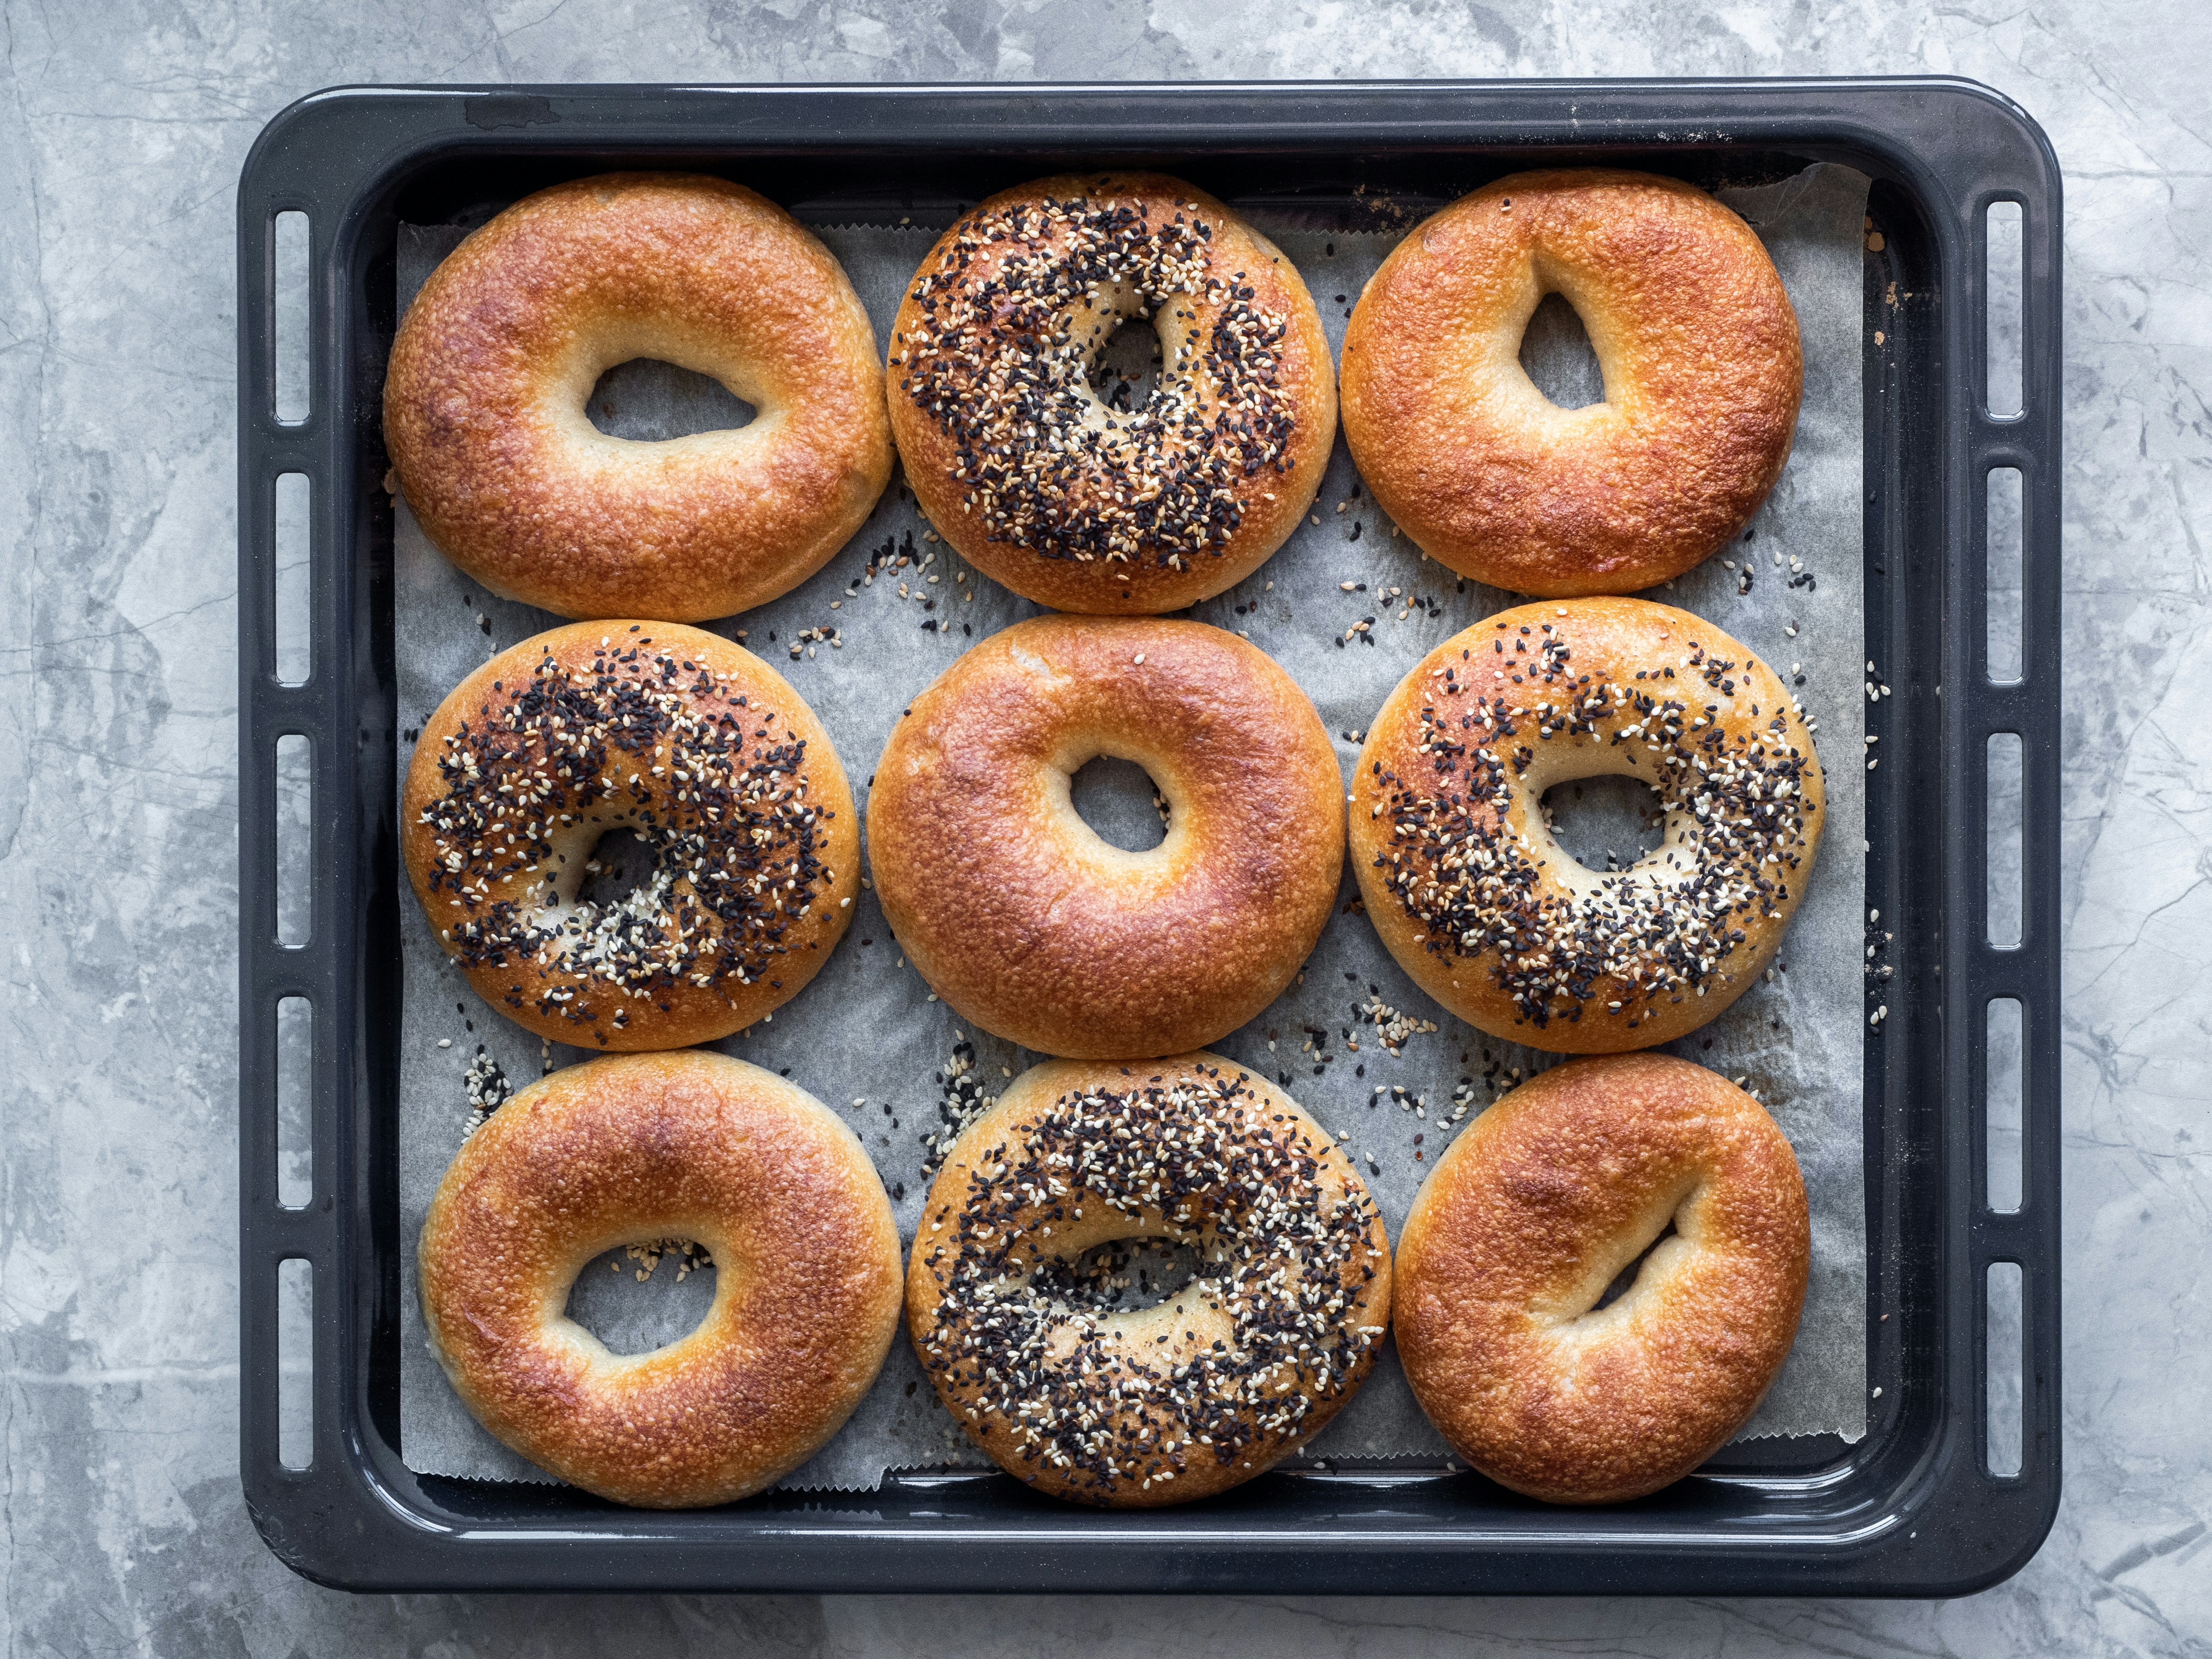 A tray full of freshly baked bagels.